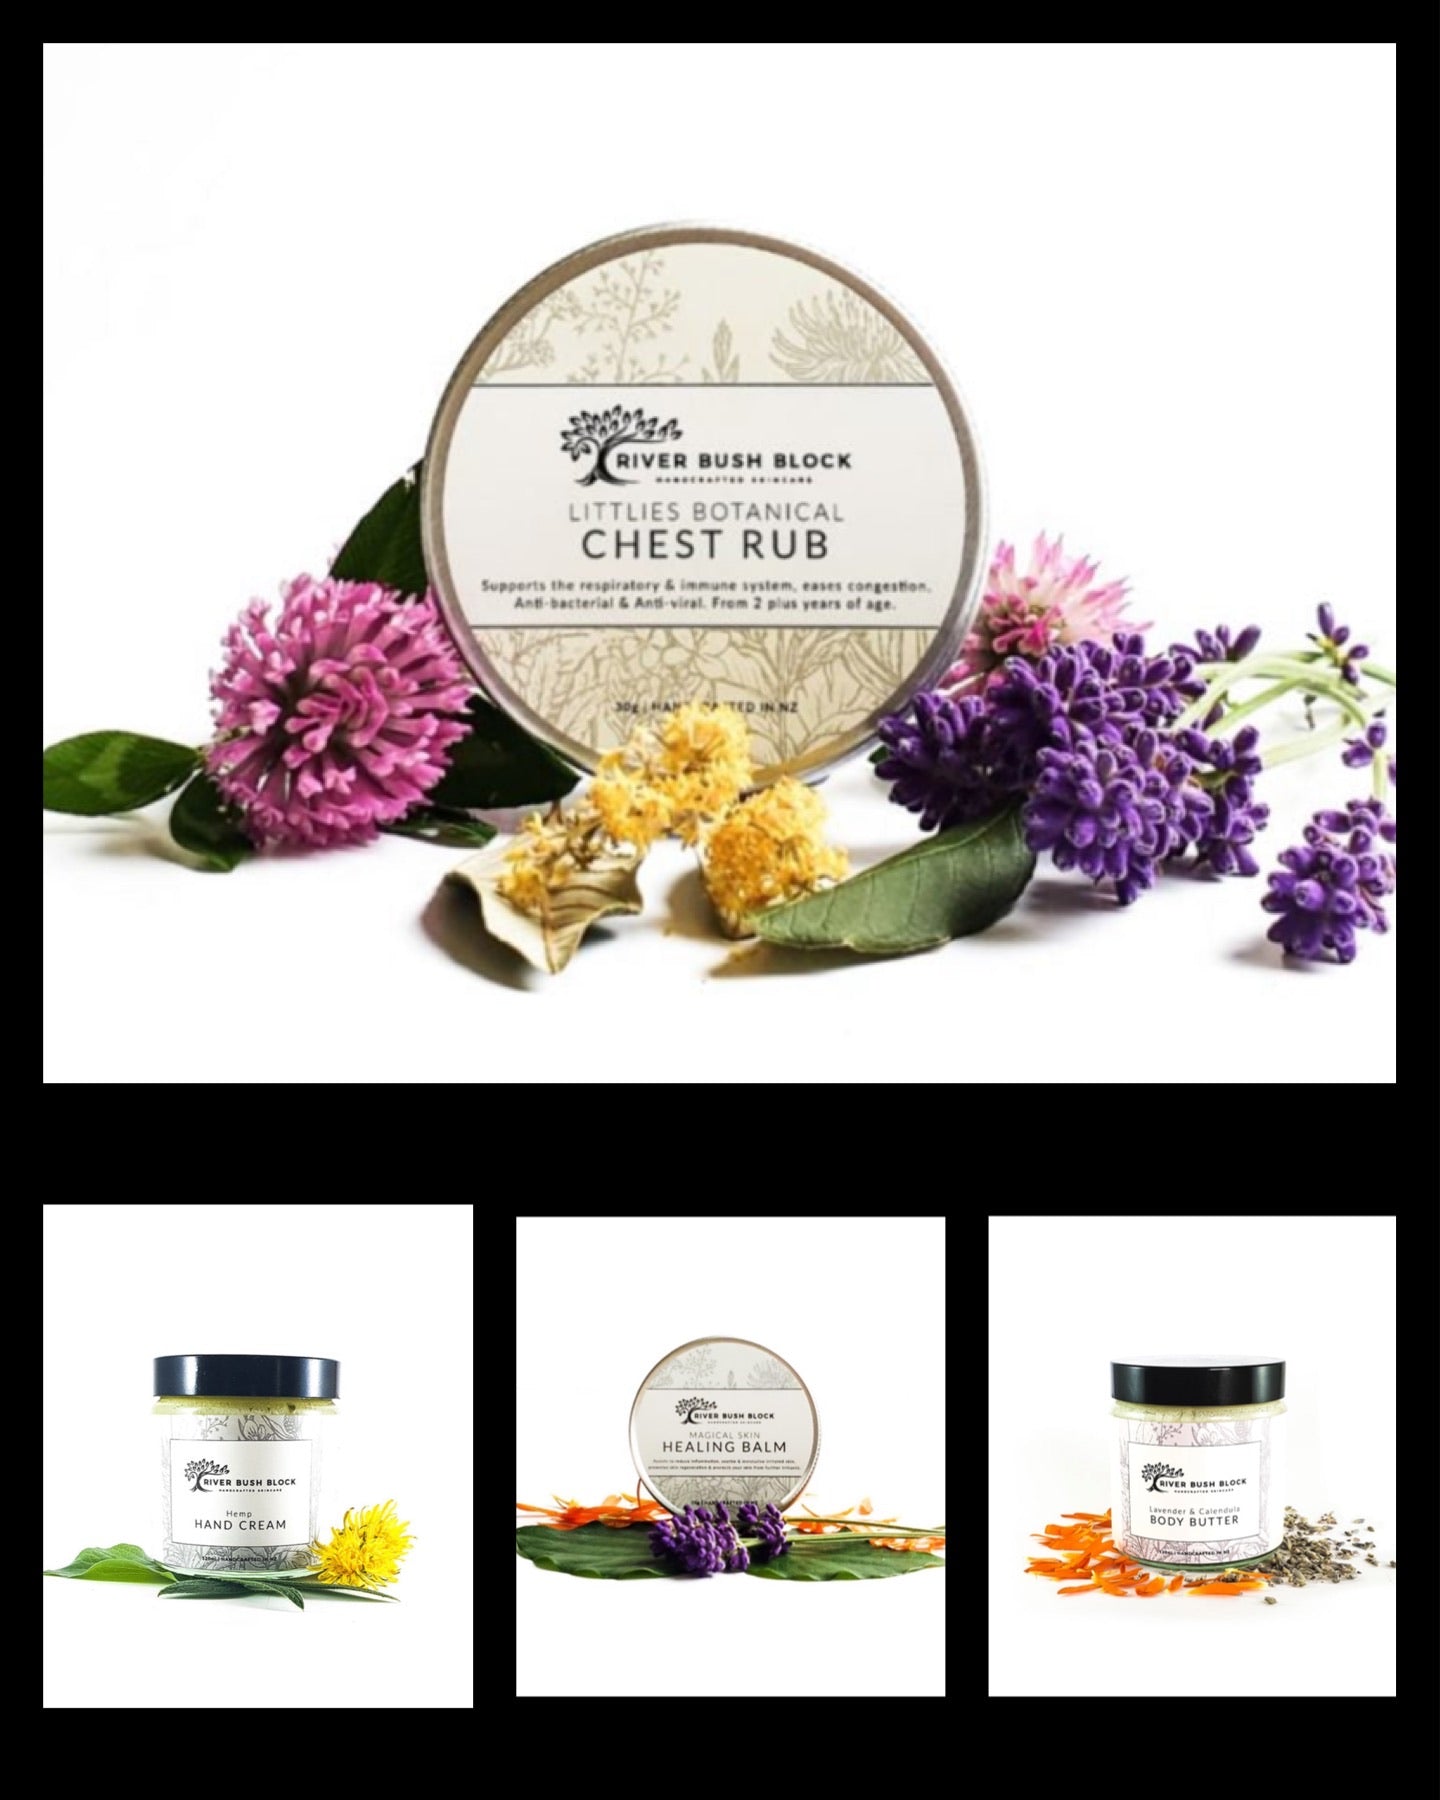 Handcrafted skincare by River Bush Block